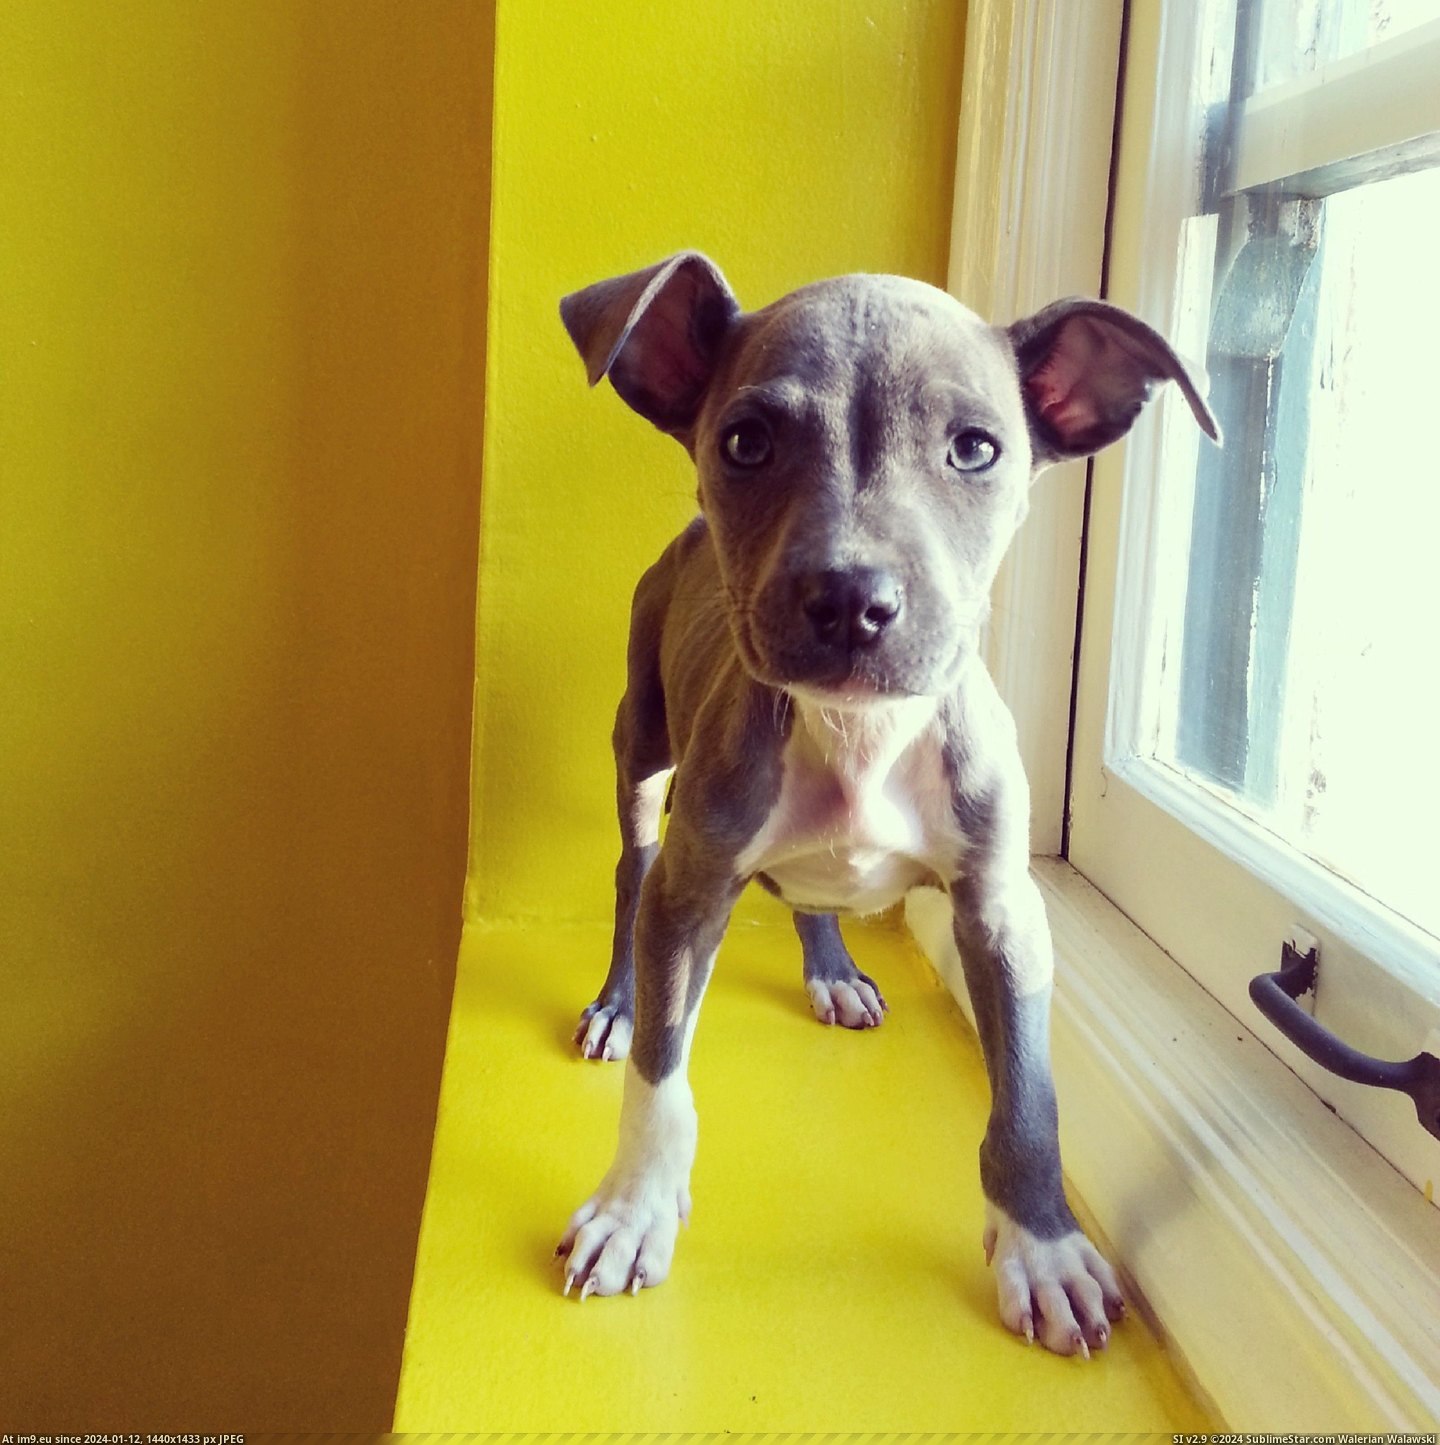 #Love #Was #Tiny #Mexico #Pit #Luna #Malnourished #She #Meet #Brought [Aww] She was malnourished and in need of love at the U.S.-Mexico border, so I brought her home. Meet my tiny pit, Luna. Pic. (Obraz z album My r/AWW favs))